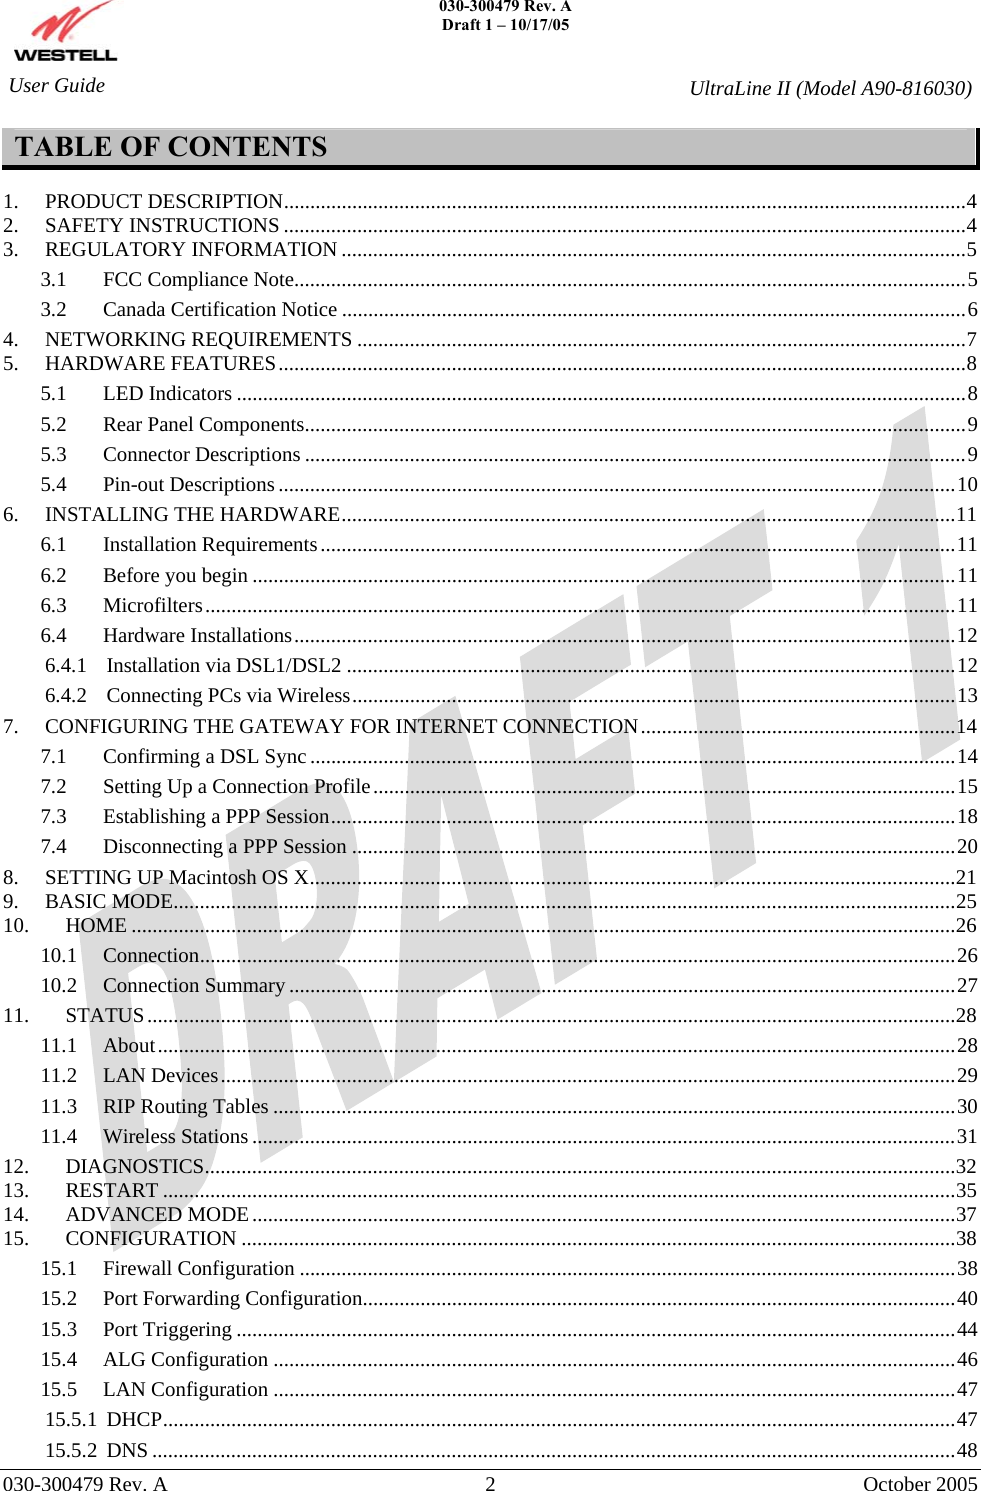    030-300479 Rev. A Draft 1 – 10/17/05     030-300479 Rev. A  2  October 2005    User Guide  UltraLine II (Model A90-816030) TABLE OF CONTENTS  1. PRODUCT DESCRIPTION..................................................................................................................................4 2. SAFETY INSTRUCTIONS ..................................................................................................................................4 3. REGULATORY INFORMATION .......................................................................................................................5 3.1 FCC Compliance Note................................................................................................................................5 3.2 Canada Certification Notice .......................................................................................................................6 4. NETWORKING REQUIREMENTS ....................................................................................................................7 5. HARDWARE FEATURES...................................................................................................................................8 5.1 LED Indicators ...........................................................................................................................................8 5.2 Rear Panel Components..............................................................................................................................9 5.3 Connector Descriptions ..............................................................................................................................9 5.4 Pin-out Descriptions .................................................................................................................................10 6. INSTALLING THE HARDWARE.....................................................................................................................11 6.1 Installation Requirements.........................................................................................................................11 6.2 Before you begin ......................................................................................................................................11 6.3 Microfilters...............................................................................................................................................11 6.4 Hardware Installations..............................................................................................................................12 6.4.1 Installation via DSL1/DSL2 ....................................................................................................................12 6.4.2 Connecting PCs via Wireless...................................................................................................................13 7. CONFIGURING THE GATEWAY FOR INTERNET CONNECTION............................................................14 7.1 Confirming a DSL Sync ...........................................................................................................................14 7.2 Setting Up a Connection Profile...............................................................................................................15 7.3 Establishing a PPP Session.......................................................................................................................18 7.4 Disconnecting a PPP Session ...................................................................................................................20 8. SETTING UP Macintosh OS X...........................................................................................................................21 9. BASIC MODE.....................................................................................................................................................25 10. HOME .............................................................................................................................................................26 10.1 Connection................................................................................................................................................26 10.2 Connection Summary ...............................................................................................................................27 11. STATUS..........................................................................................................................................................28 11.1 About........................................................................................................................................................28 11.2 LAN Devices............................................................................................................................................29 11.3 RIP Routing Tables ..................................................................................................................................30 11.4 Wireless Stations ......................................................................................................................................31 12. DIAGNOSTICS...............................................................................................................................................32 13. RESTART .......................................................................................................................................................35 14. ADVANCED MODE......................................................................................................................................37 15. CONFIGURATION ........................................................................................................................................38 15.1 Firewall Configuration .............................................................................................................................38 15.2 Port Forwarding Configuration.................................................................................................................40 15.3 Port Triggering .........................................................................................................................................44 15.4 ALG Configuration ..................................................................................................................................46 15.5 LAN Configuration ..................................................................................................................................47 15.5.1 DHCP.......................................................................................................................................................47 15.5.2 DNS .........................................................................................................................................................48 